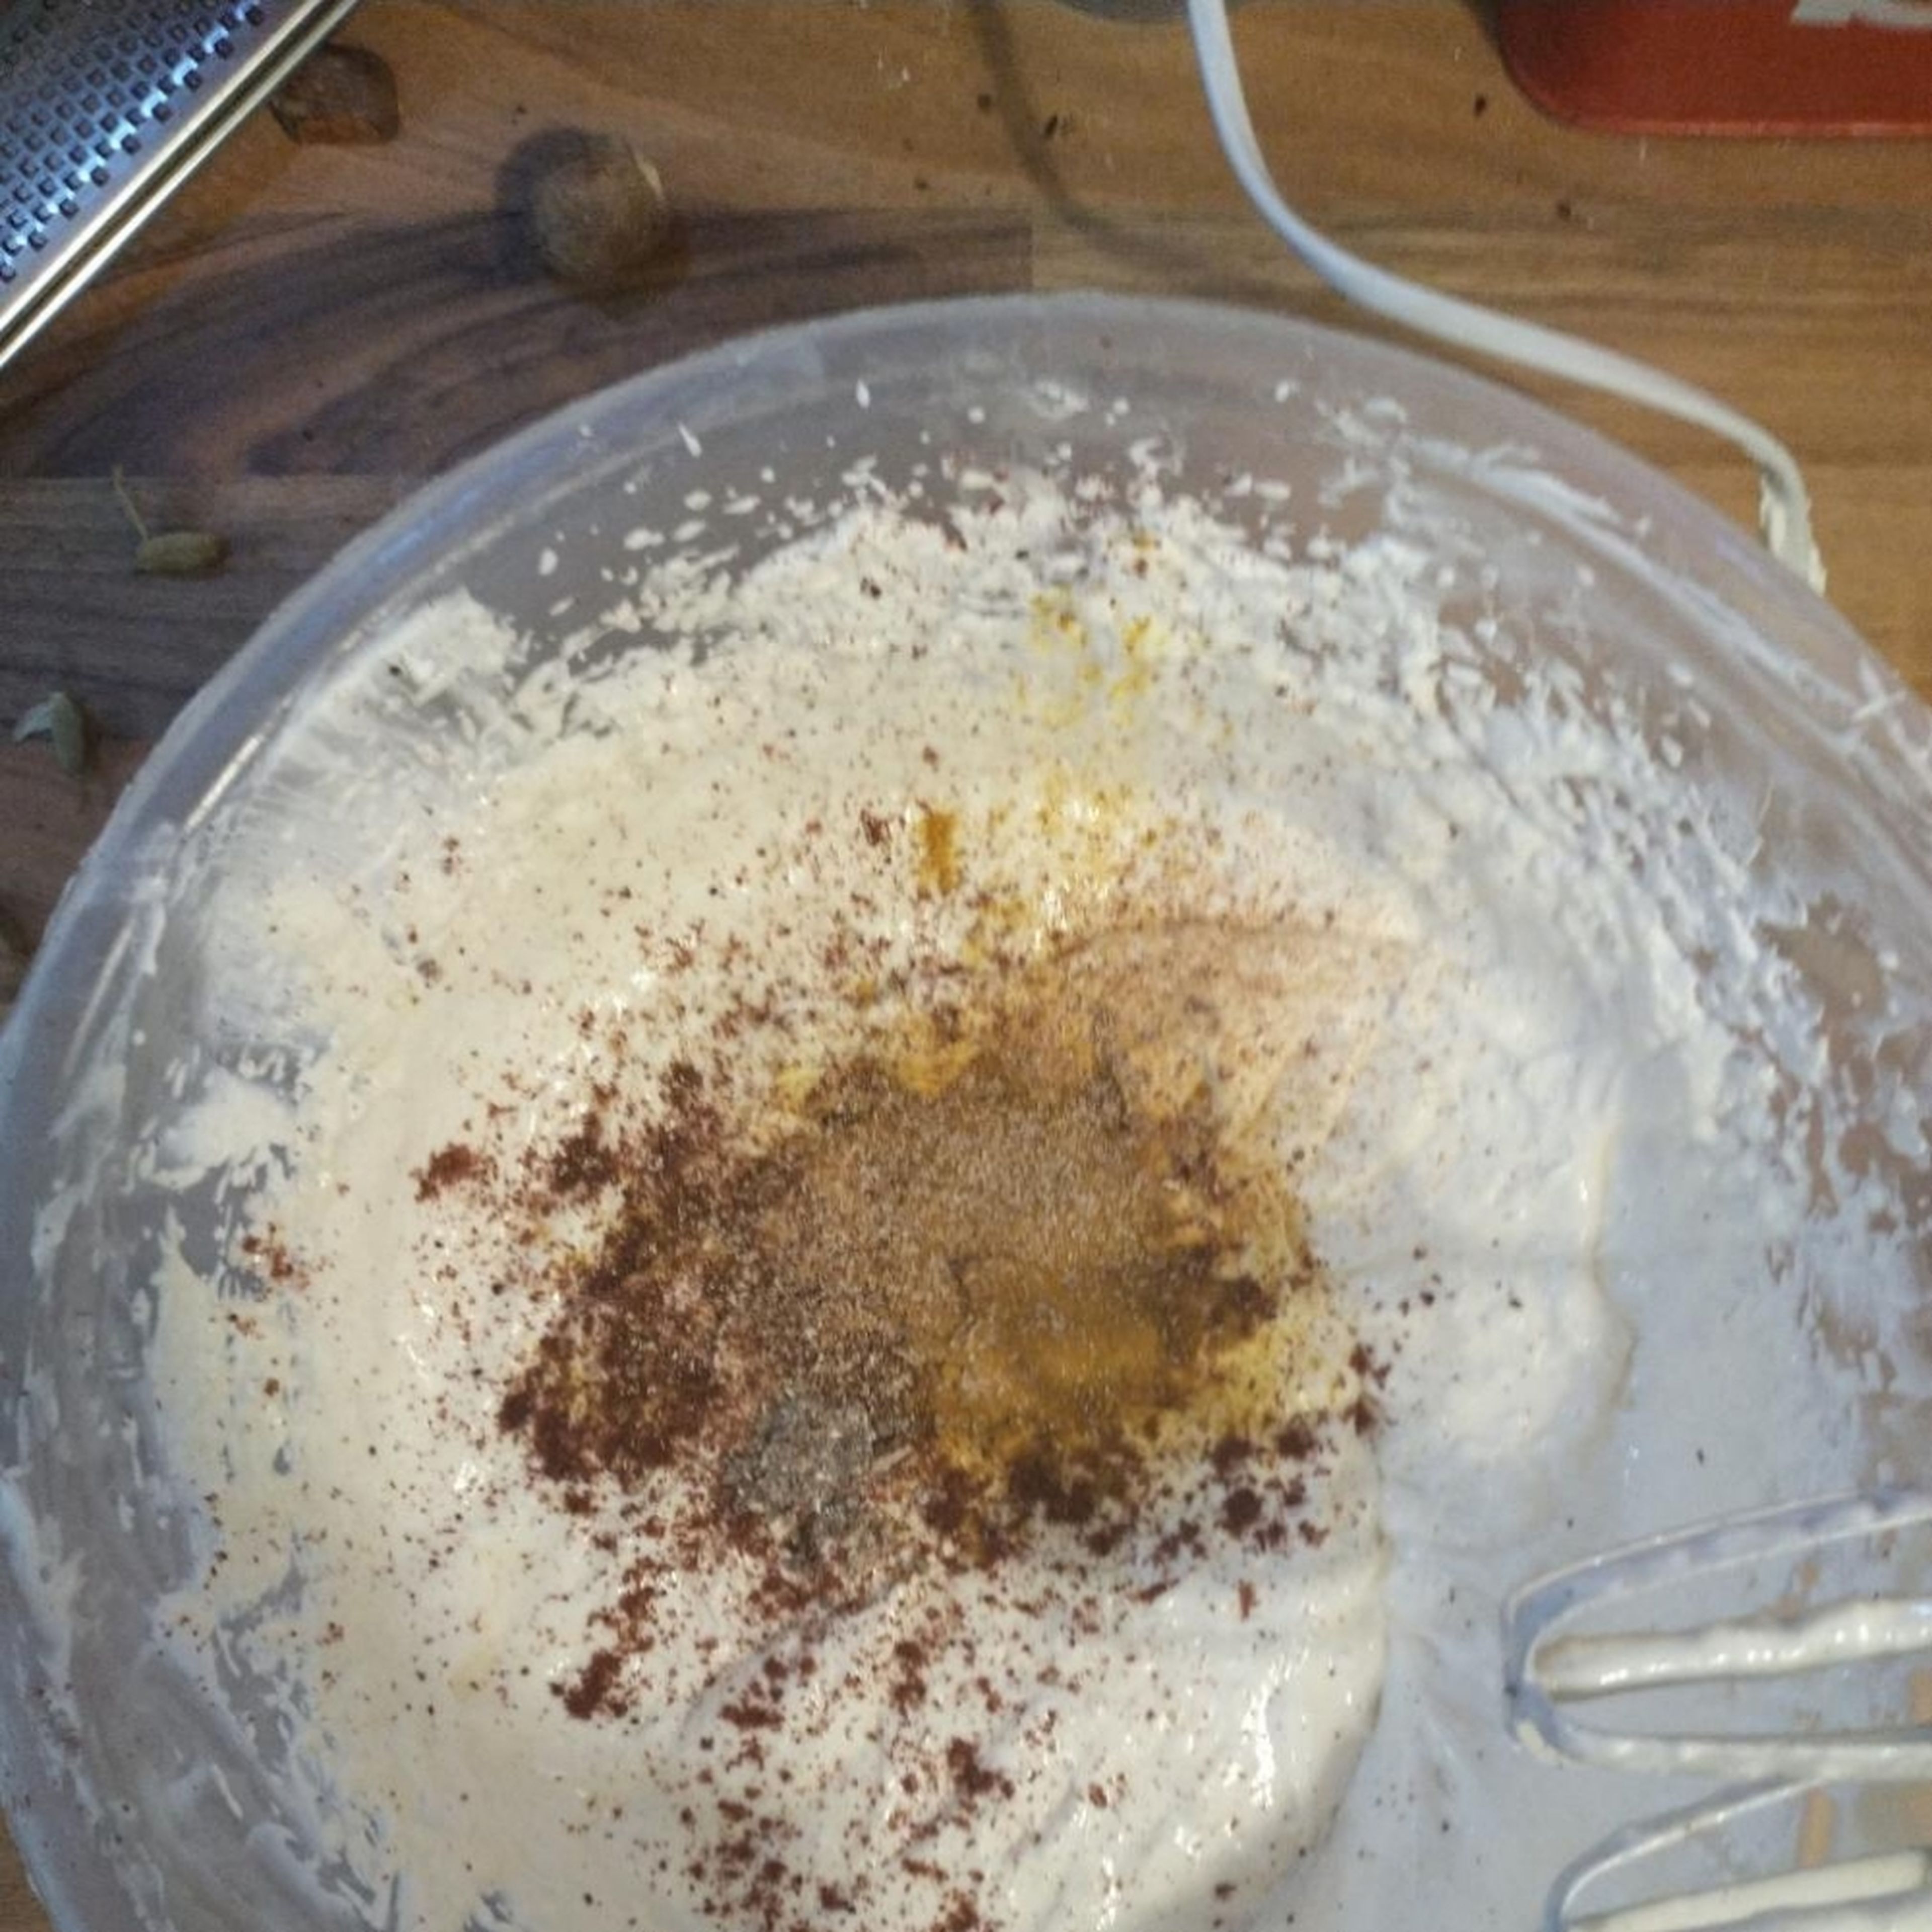 Add the sugar, little by little, until fully incorporated and lump-free. Crack open the cardamom pods and grind the seeds in a pestle and mortar. Add it to the mixture, along with the nutmeg, tumeric and a tsp of the sumac, as well as the salt. Whisk for a further 2 minutes.